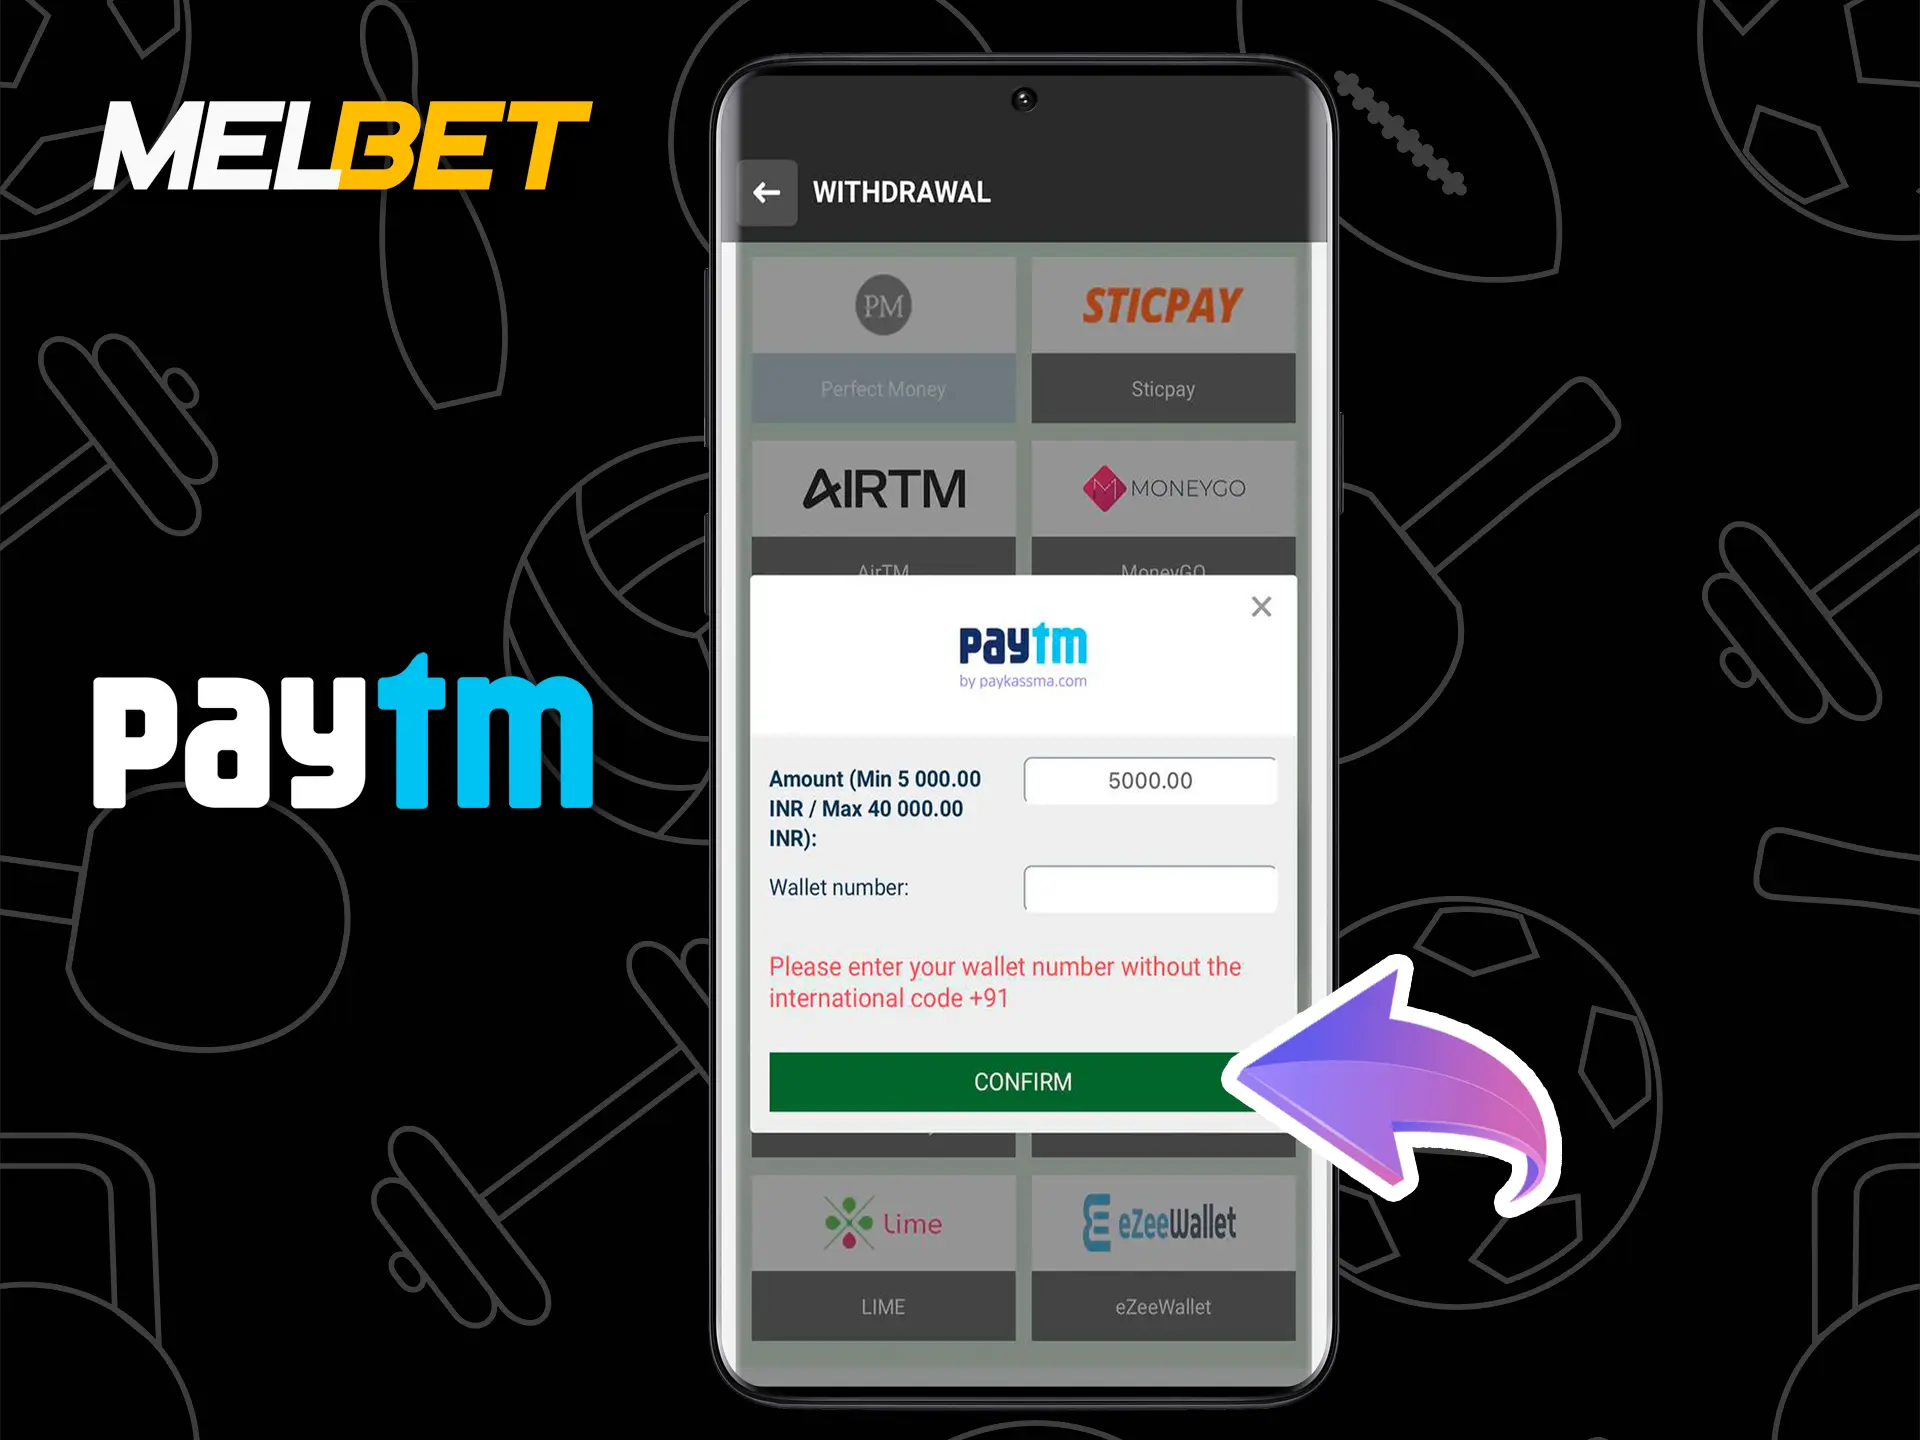 Enter your wallet number and confirm your withdrawal from Melbet.